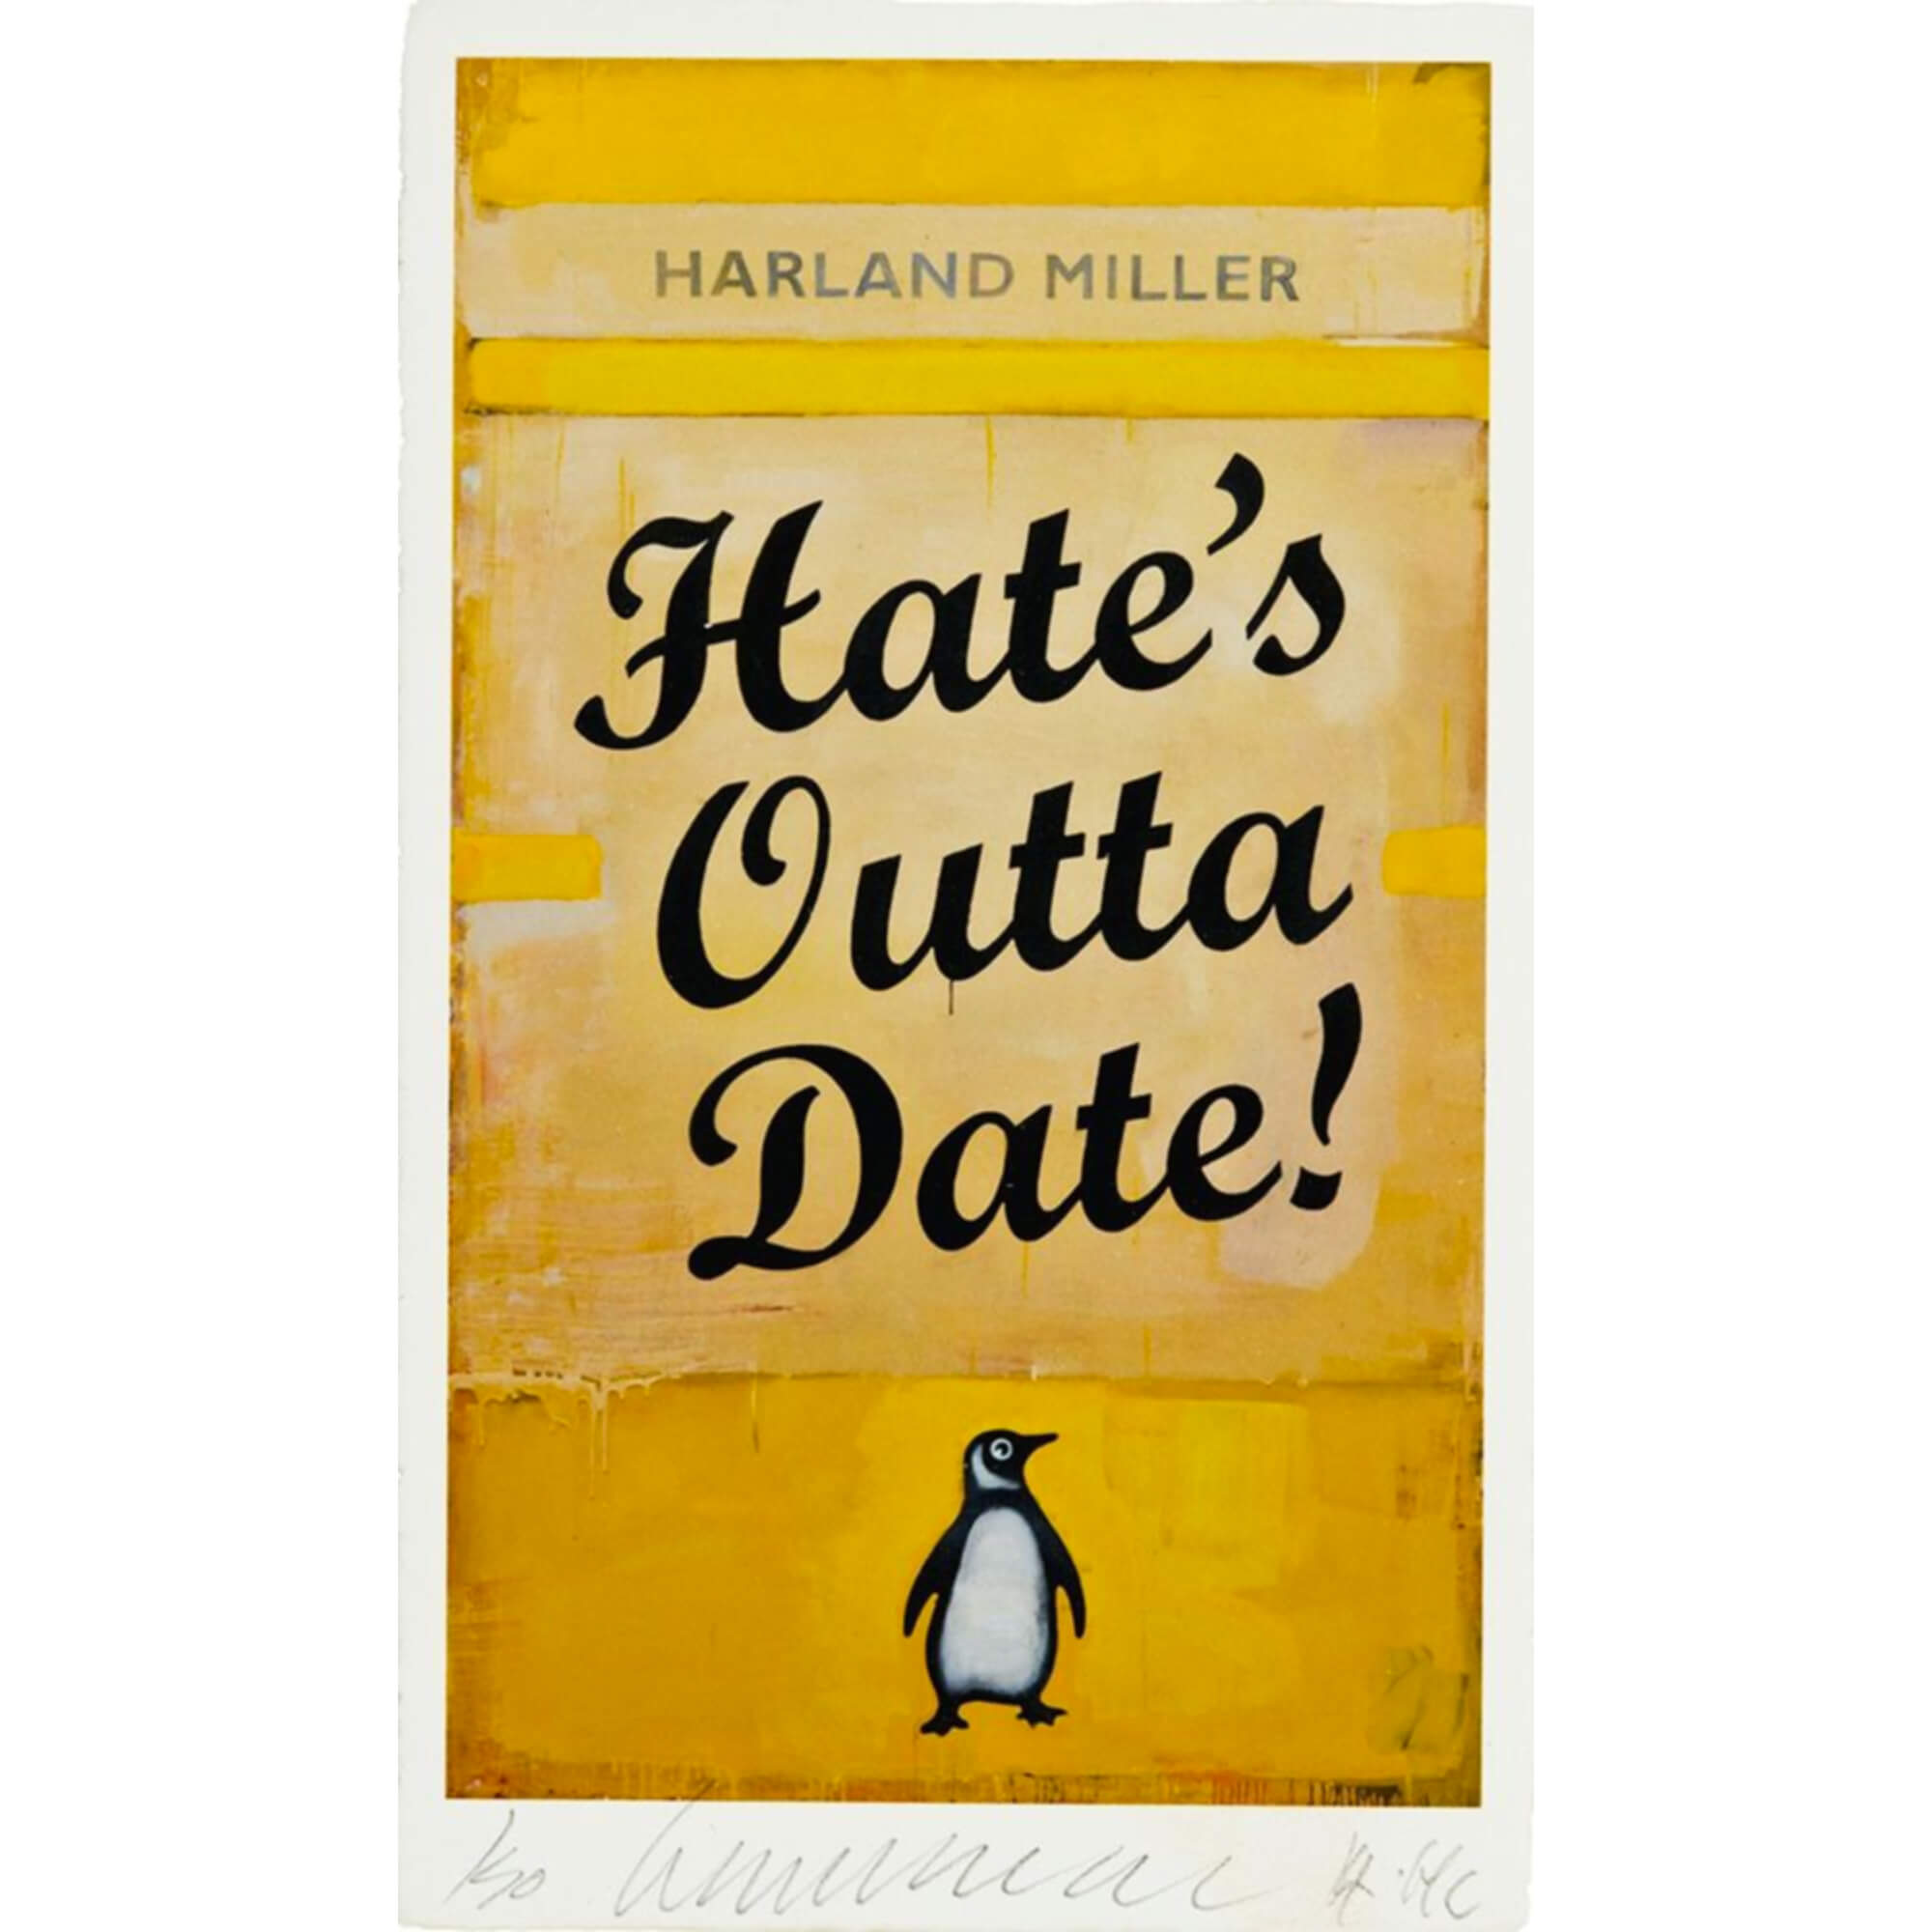 Harland Miller-Hate’s Outta Date! - Harland Miller-art print